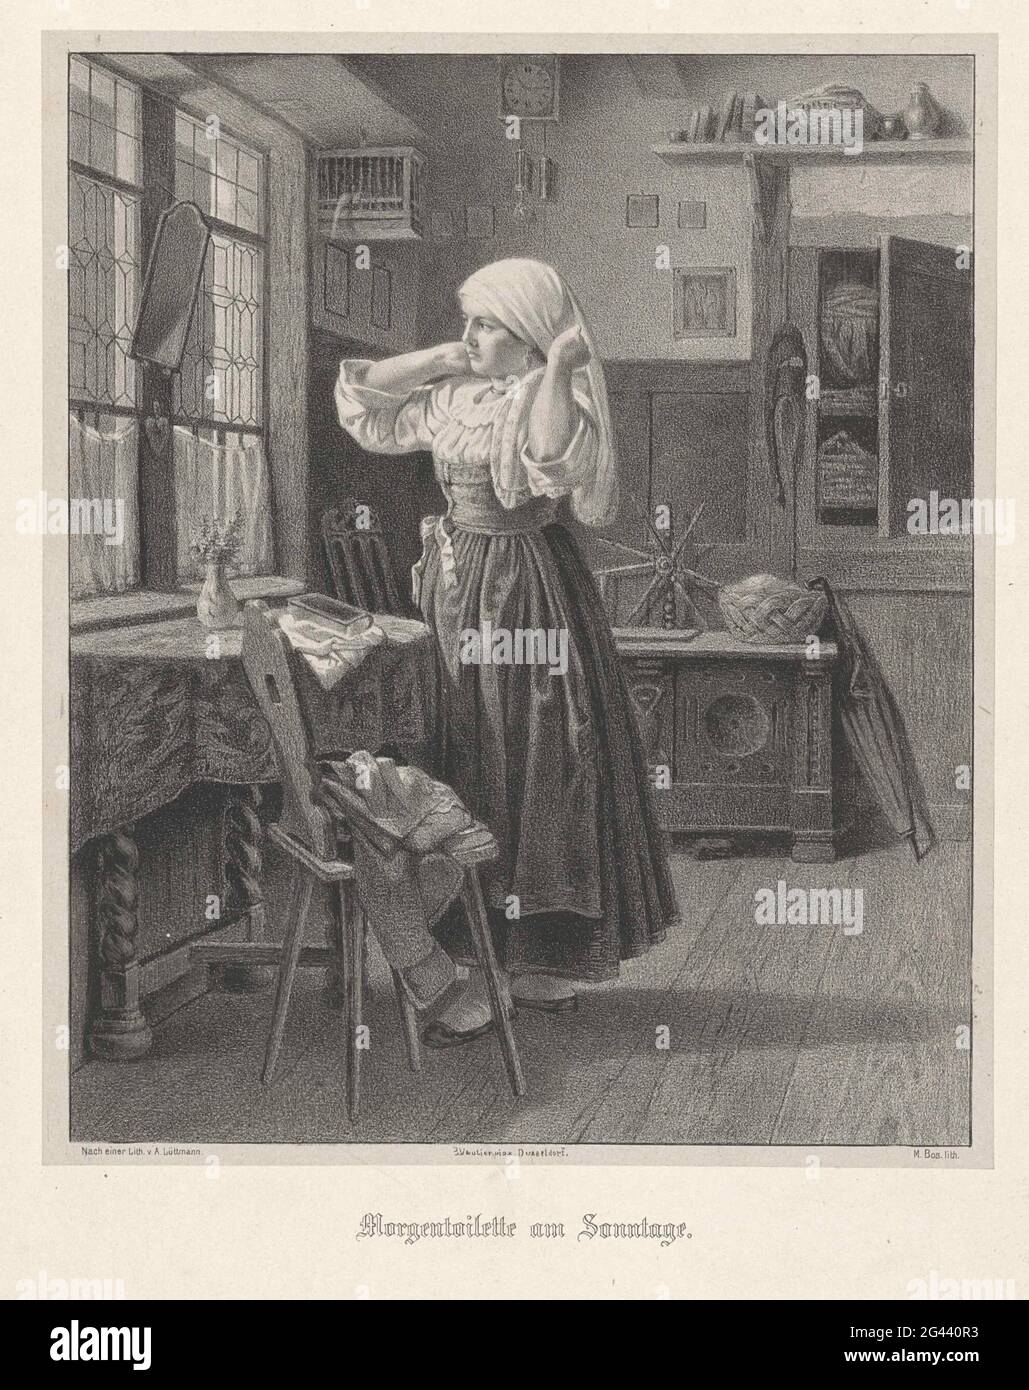 Woman dresses at the window; Morgentoilette am Sonntage. The woman looks in the mirror while knitting her headscarf. There is a jacket on the chair at the table. Behind her is the door of a cupboard open. Stock Photo